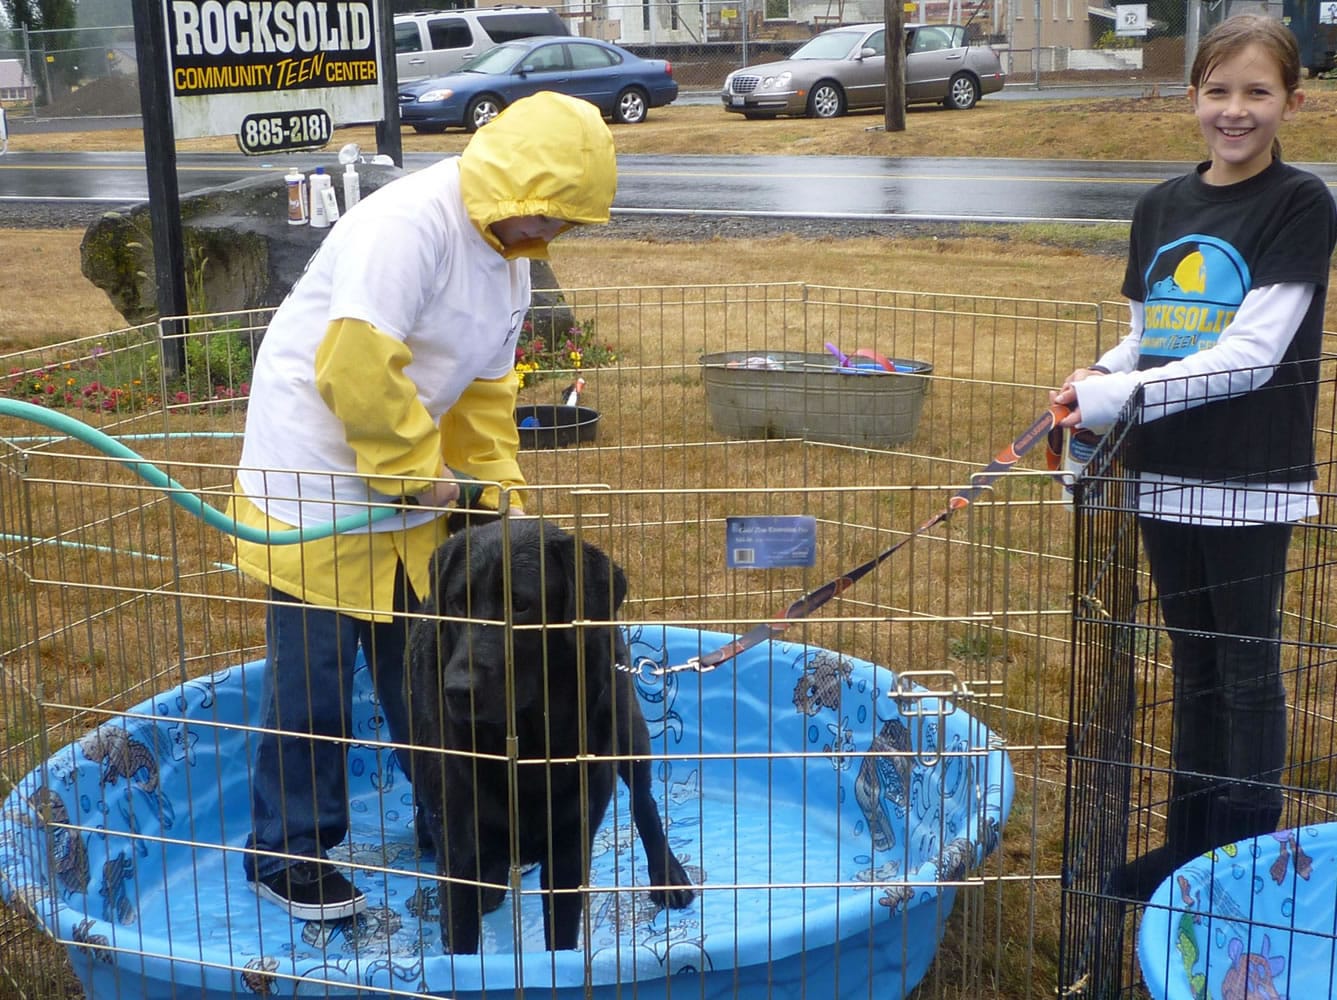 Brody Buffum, 11, left, and Vika Crossland, 10, wash a dog during the Rocksolid Community Teen Center Pet Fest.